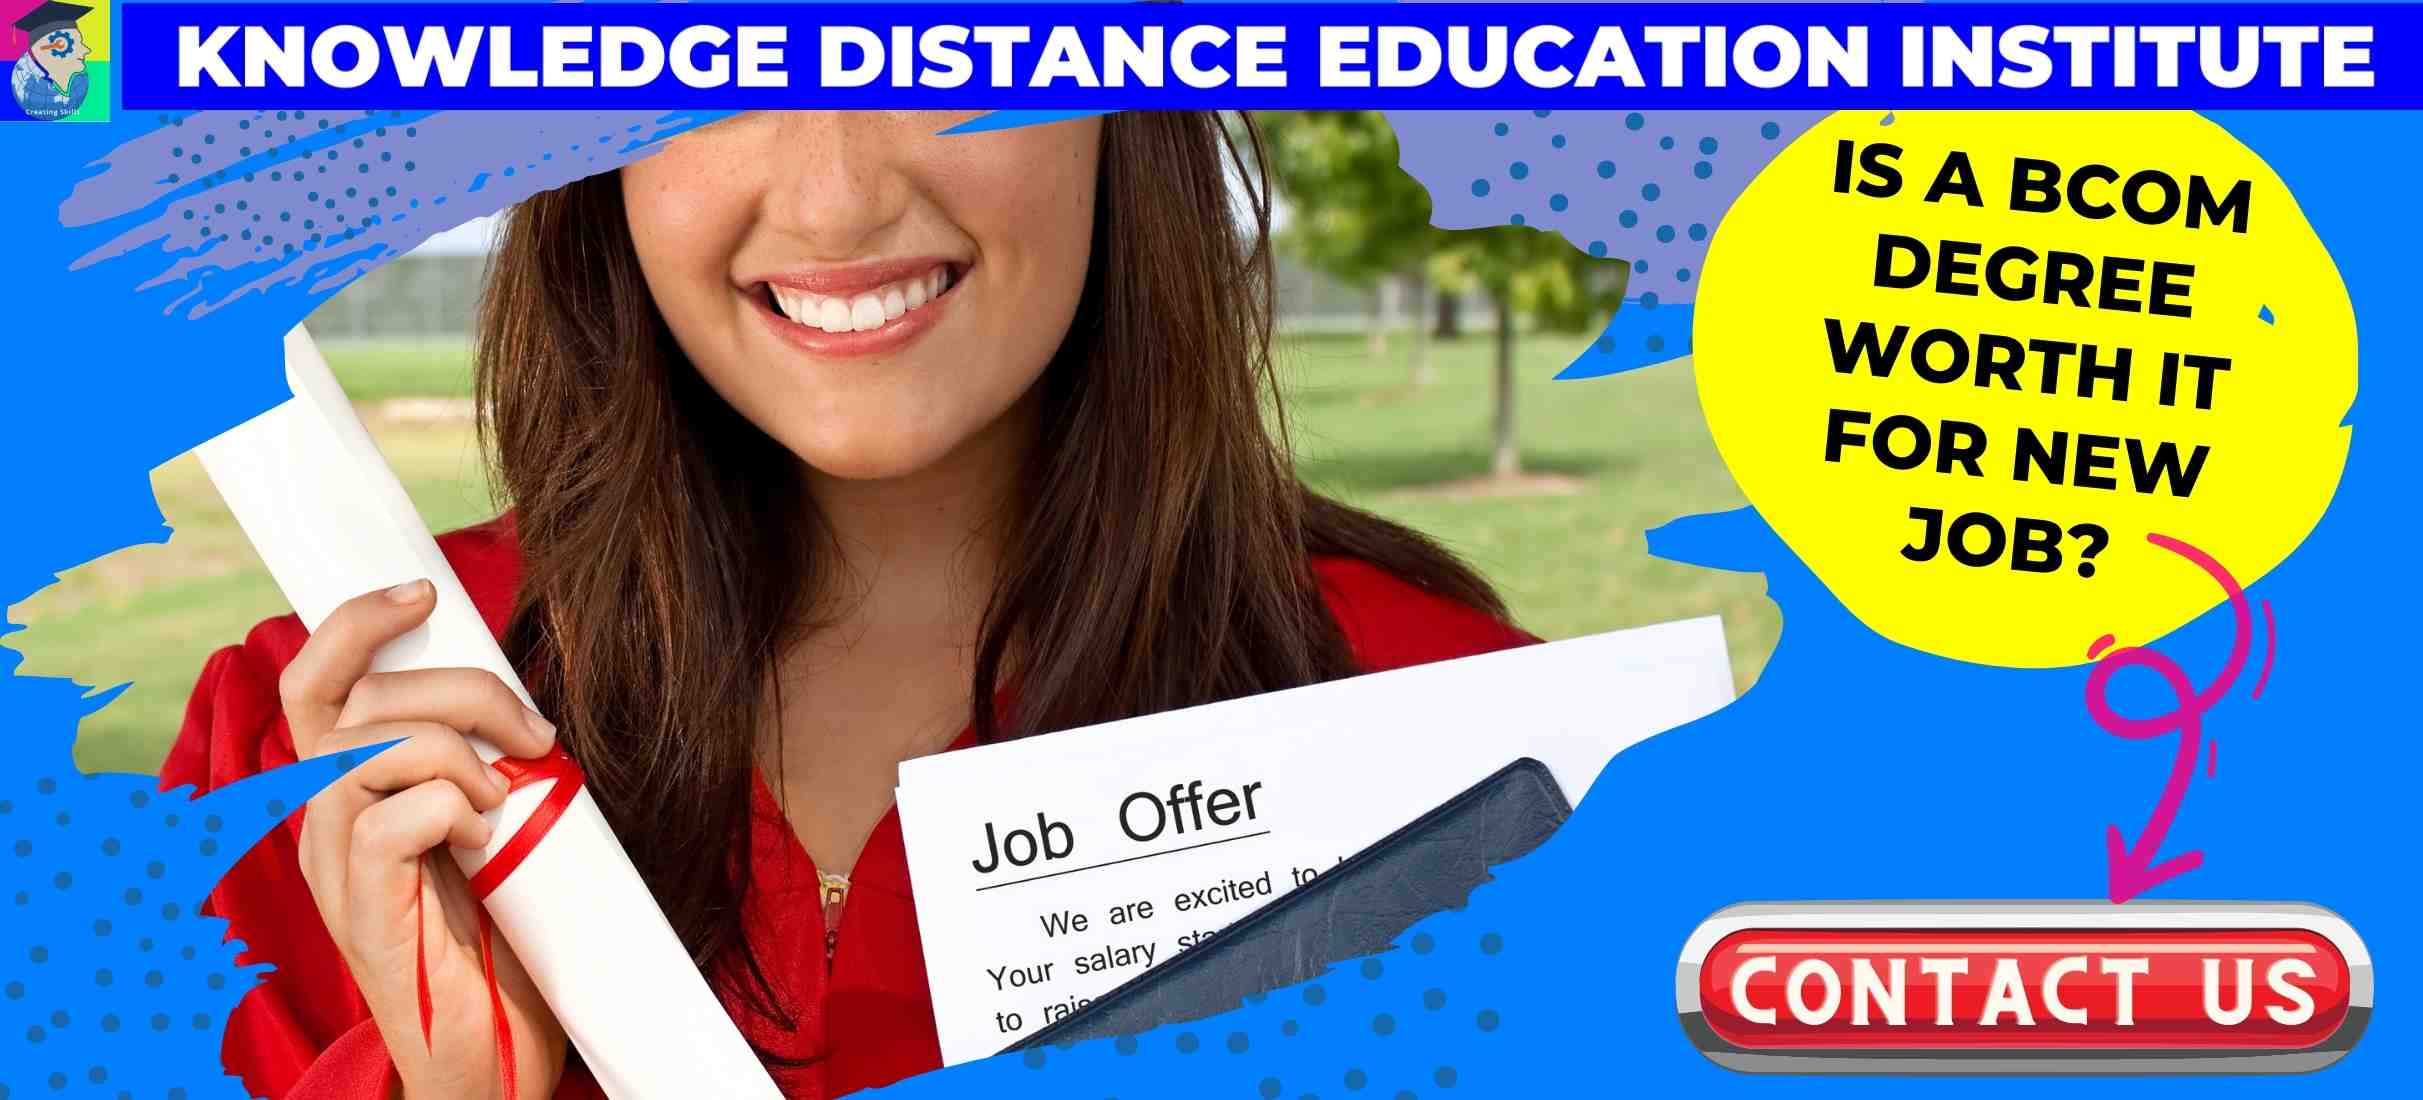 Bachelor Of Commerce - BCOM is 3 years degree course, offered in Distance, Online, Private, or  Regular Learning modes by UGC recognized Universities in India.  For career guidance you may contact Knowedge Distance Education Institute on +91 9029020524